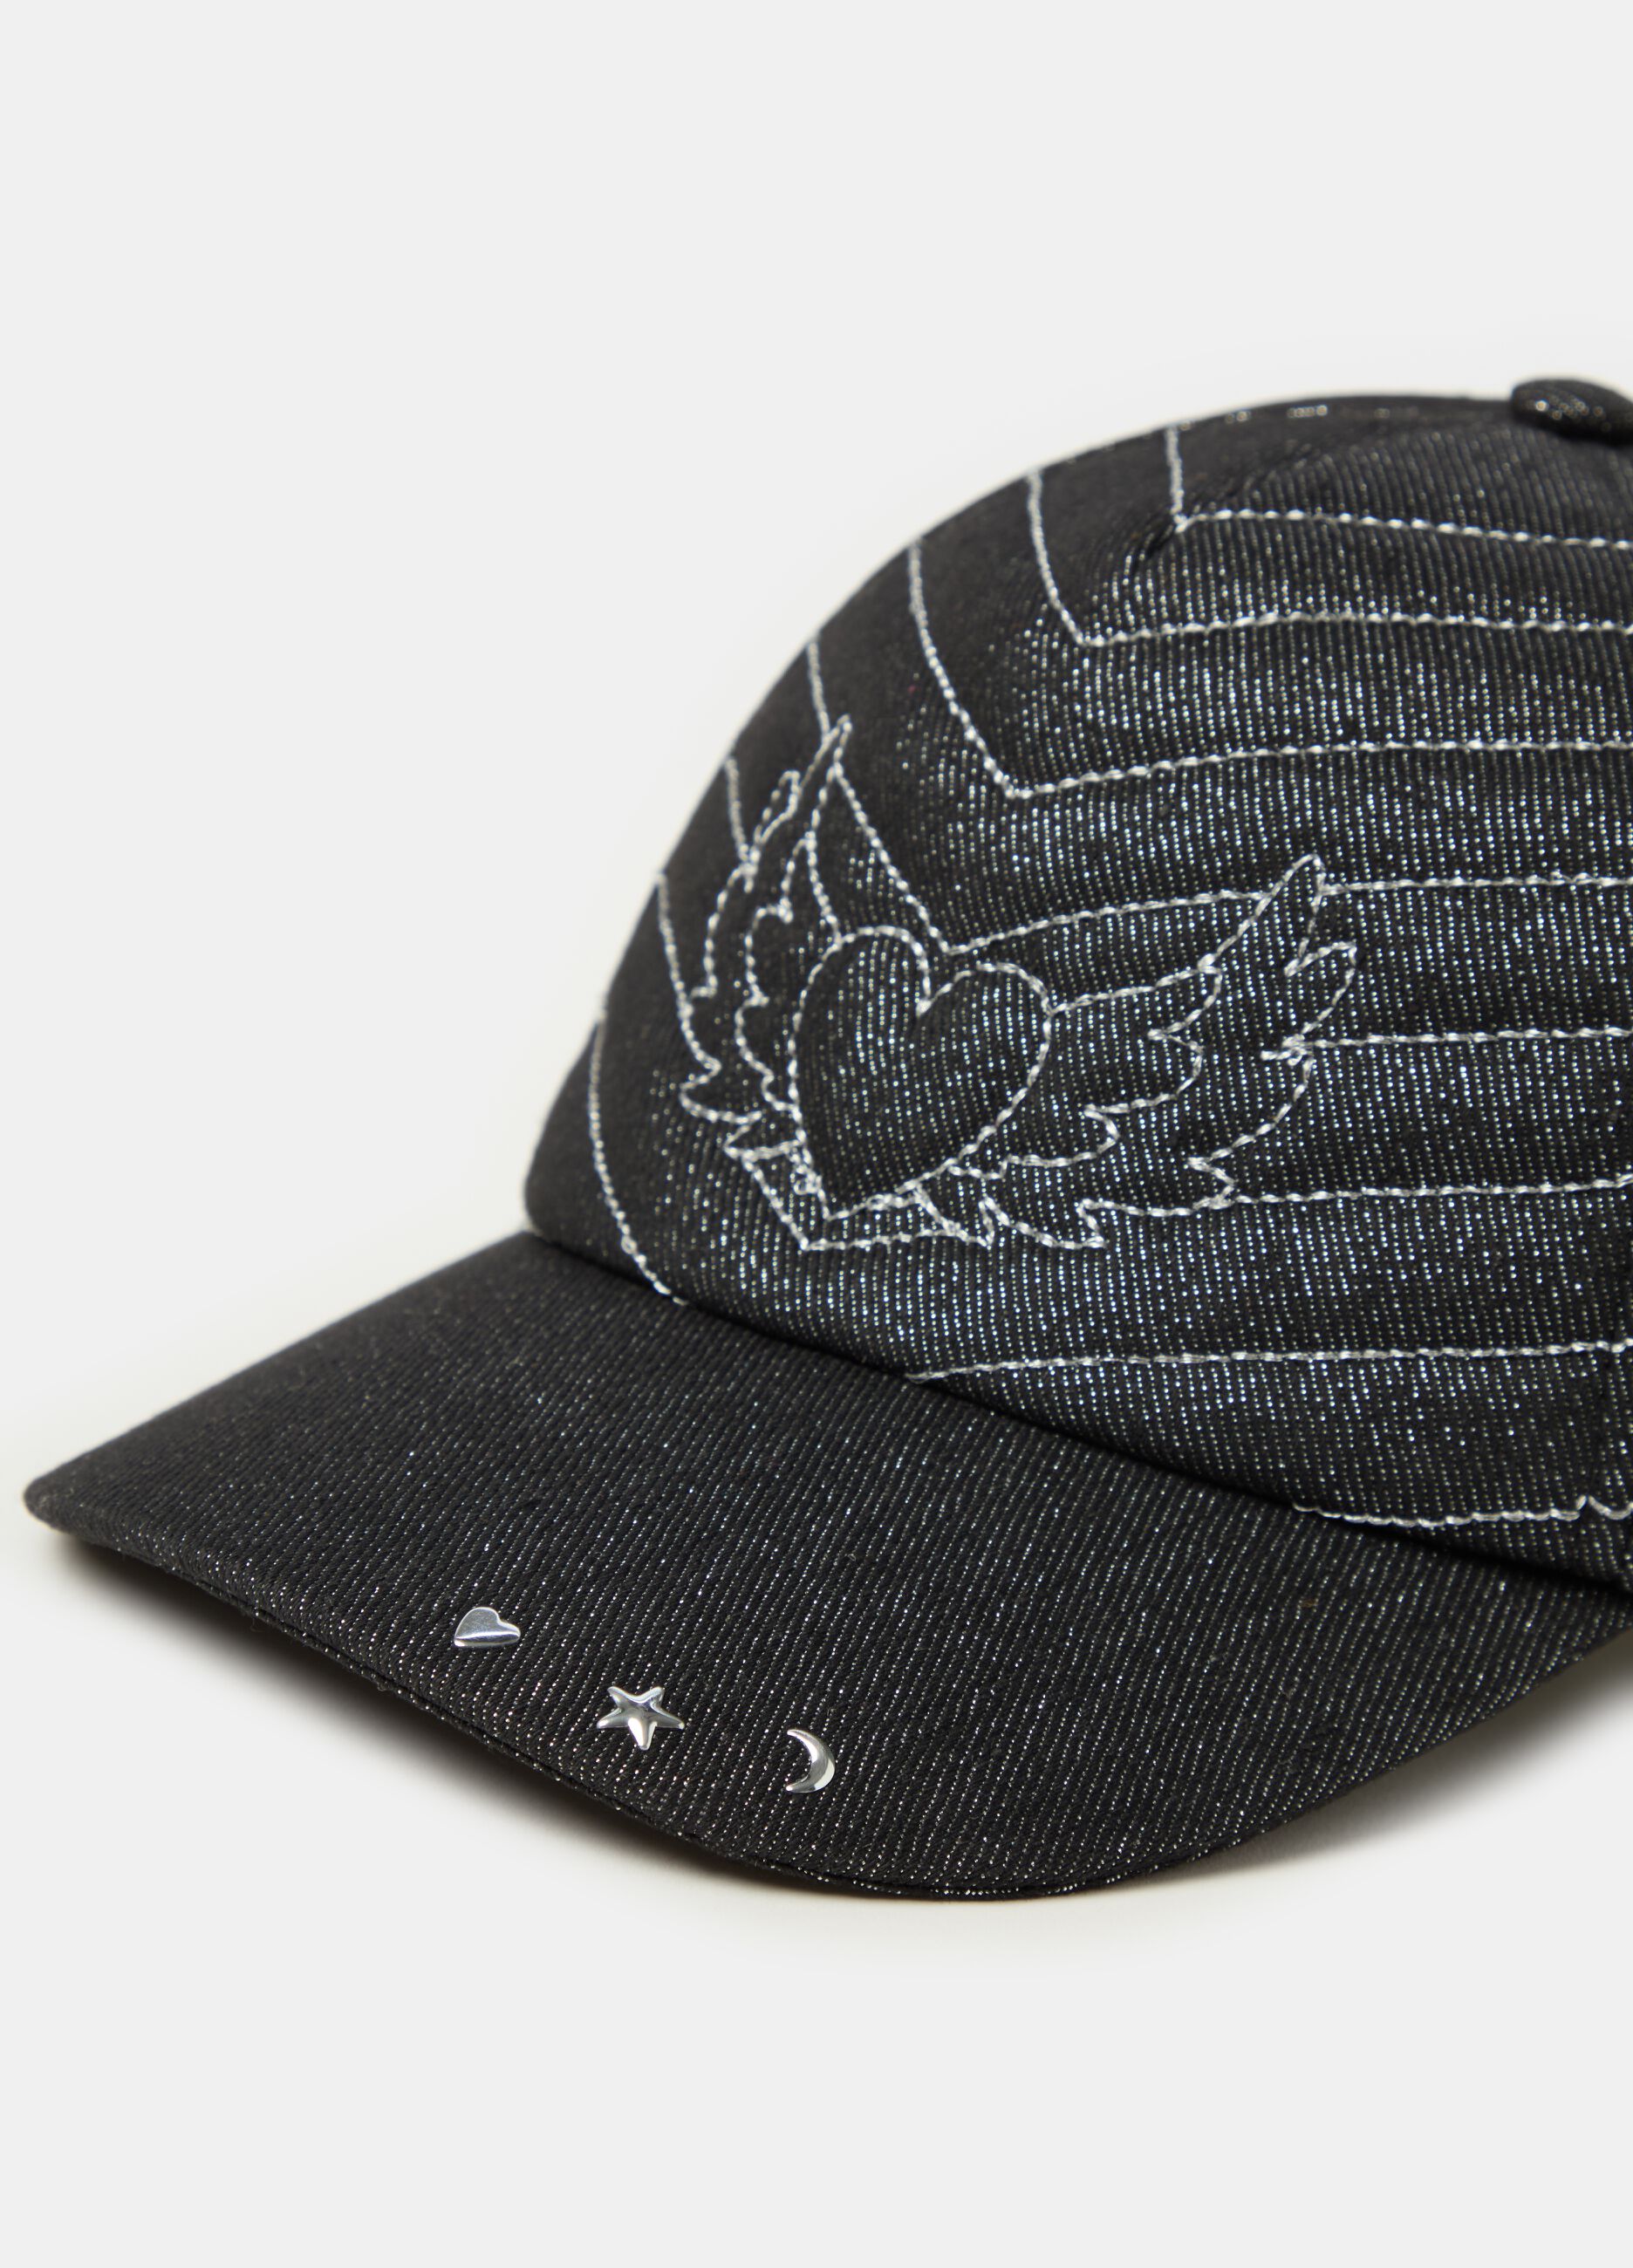 Baseball cap with winged heart embroidery